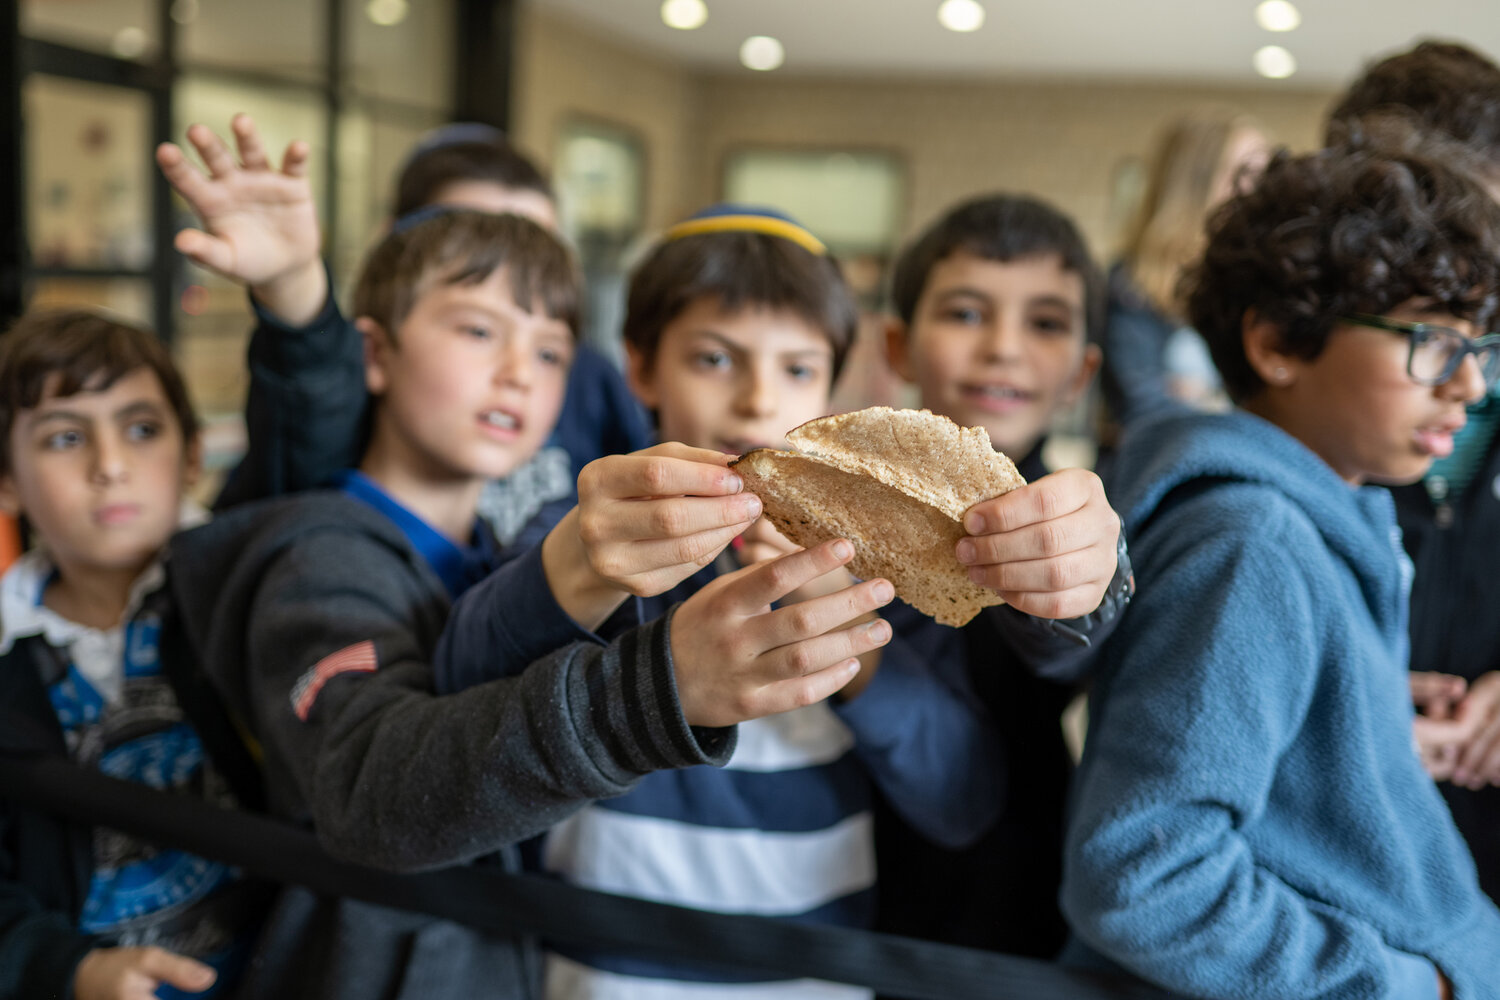 Salanter Akiba Riverdale Academy prepares for the Jewish holiday, known as Passover recently with a hand-made 18-minute shmurah matzah bake in their matzah factory. The matzah was to be used during the holiday.